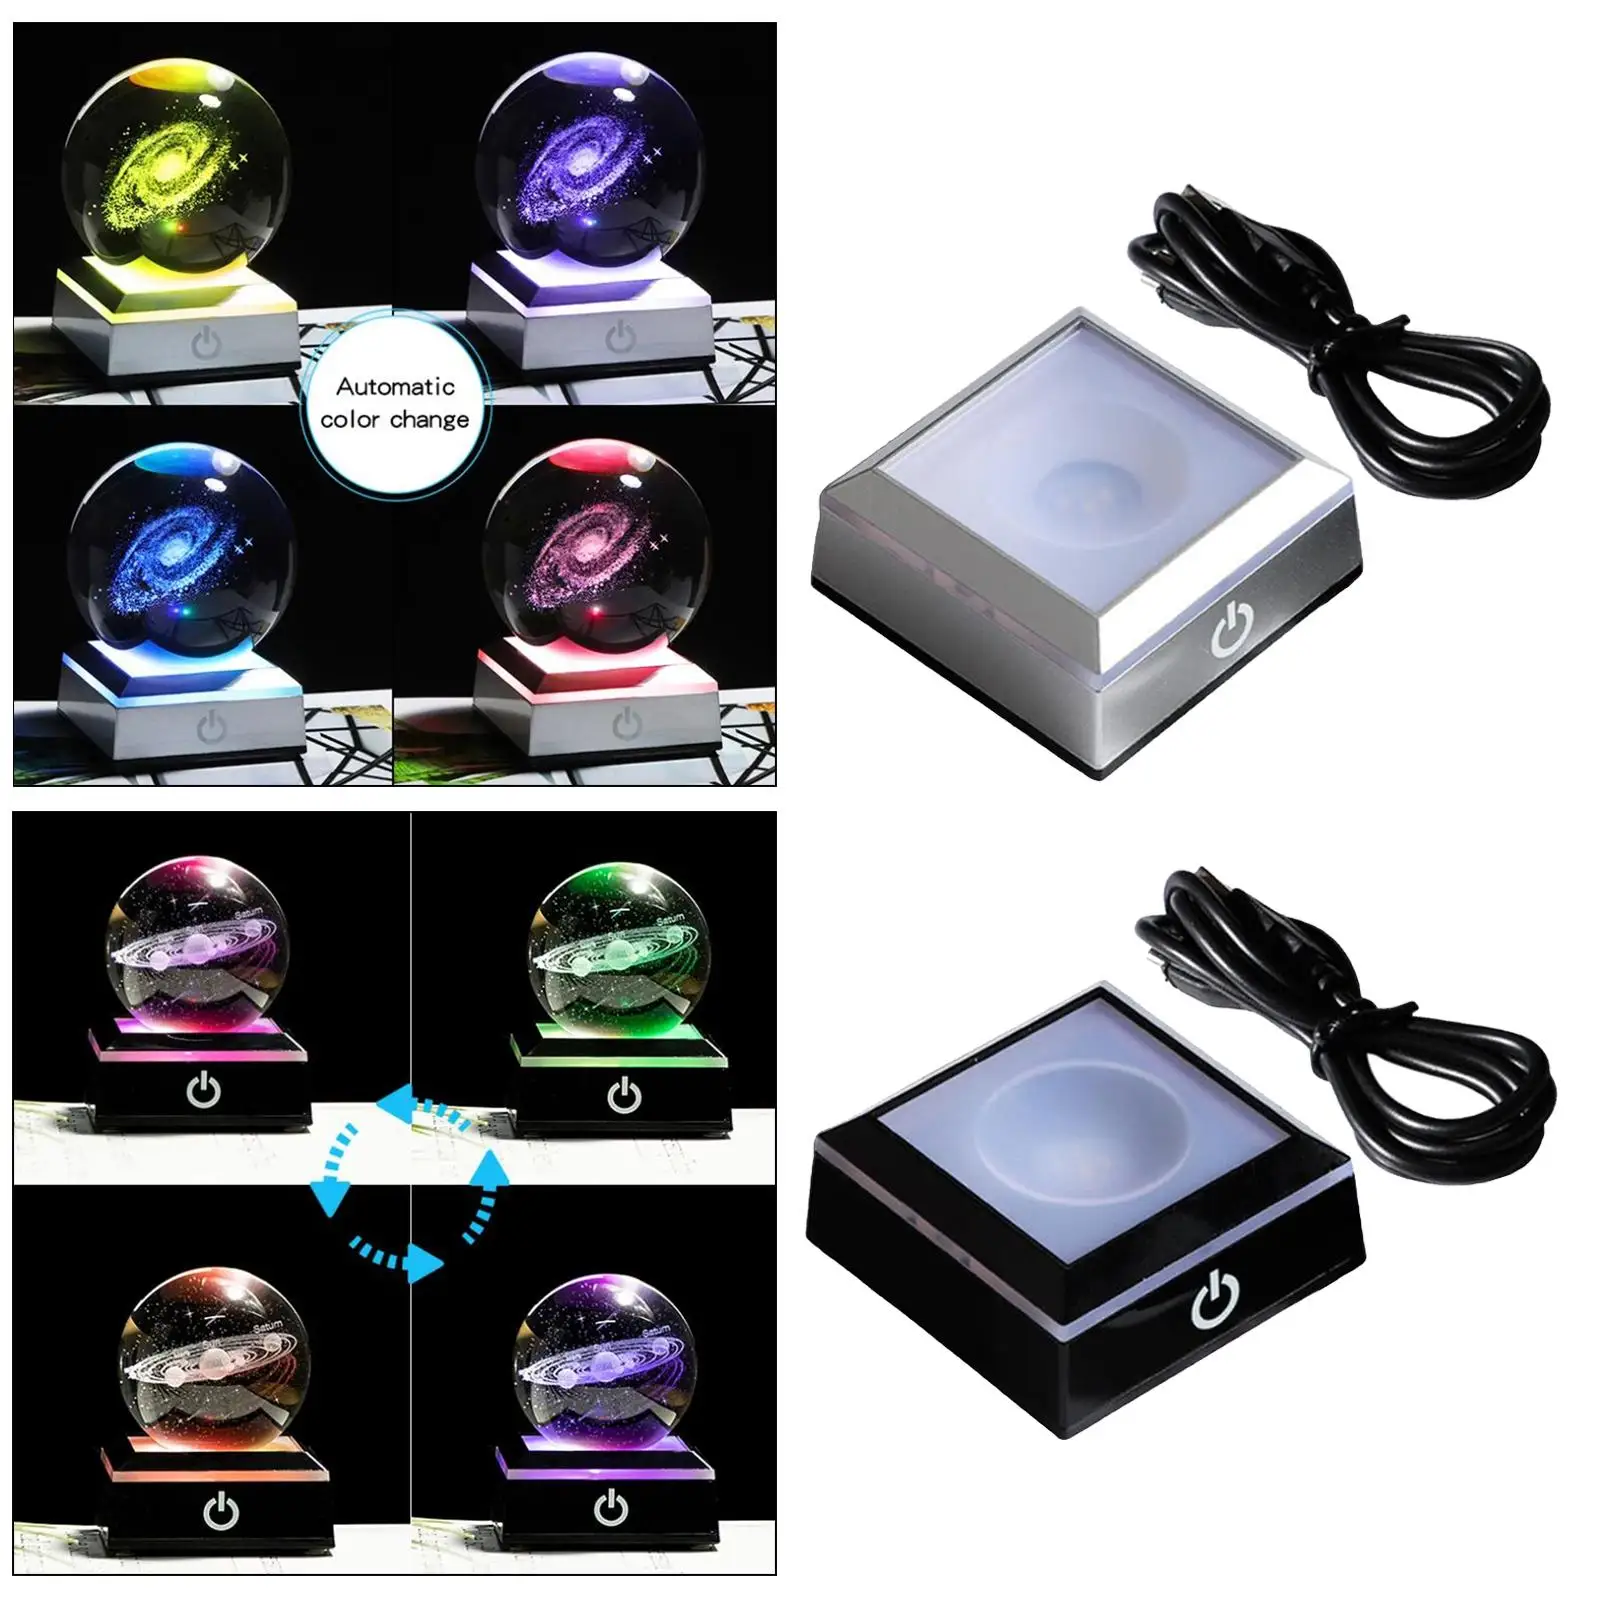 LED light base display stand lamps craft for crystals glass resin